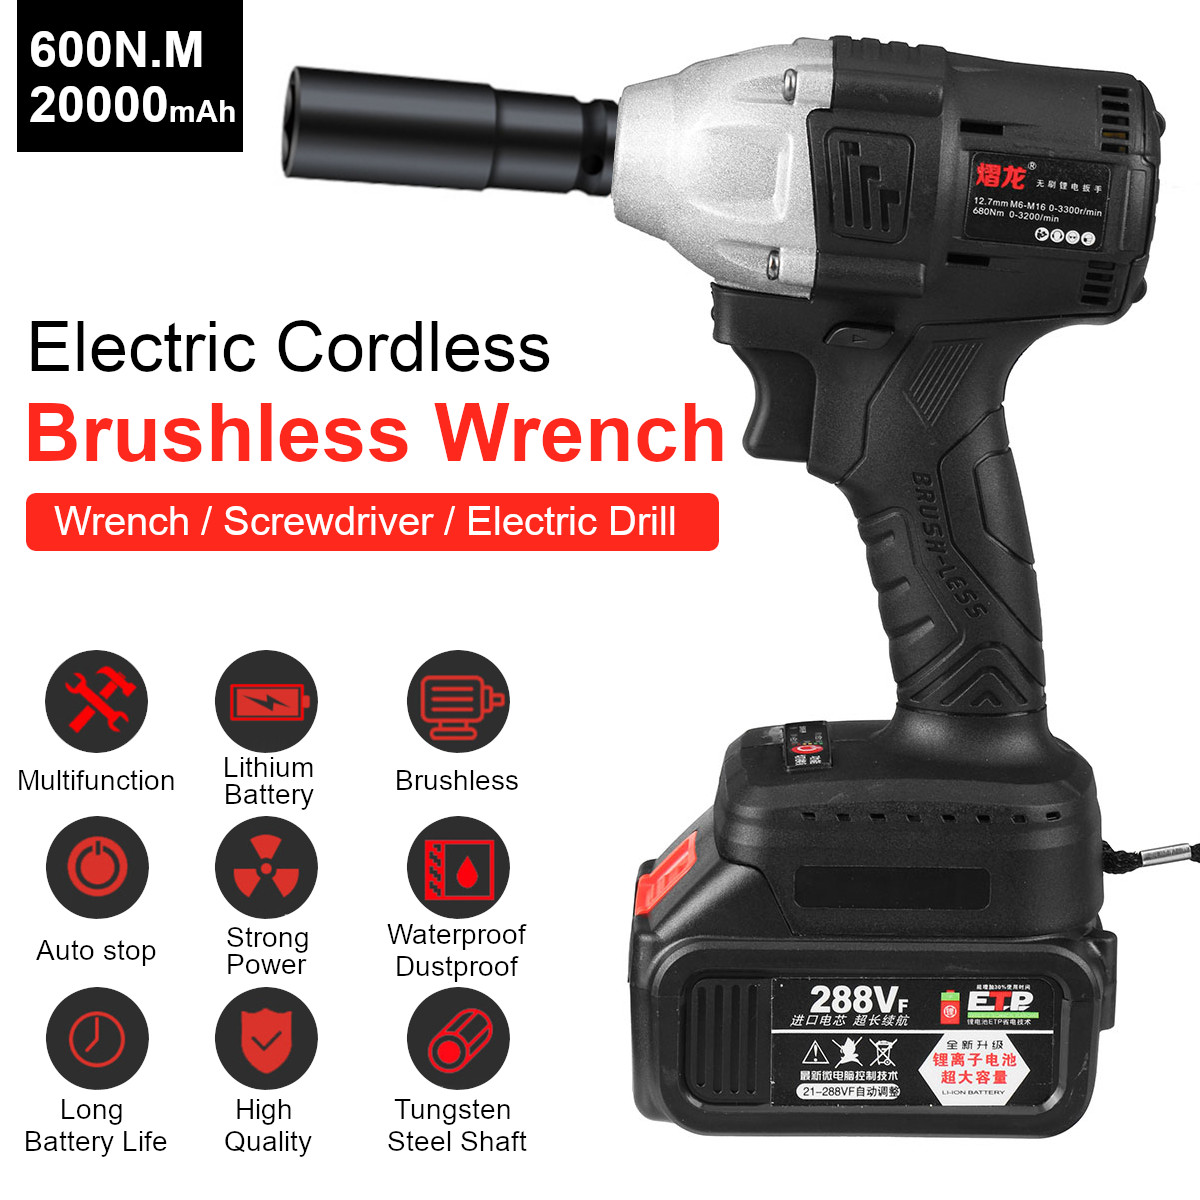 288VF-Cordless-Brushless-Electric-Wrench-600Nm-Impact-Wrench-20000mAh-Recharge-1751574-1